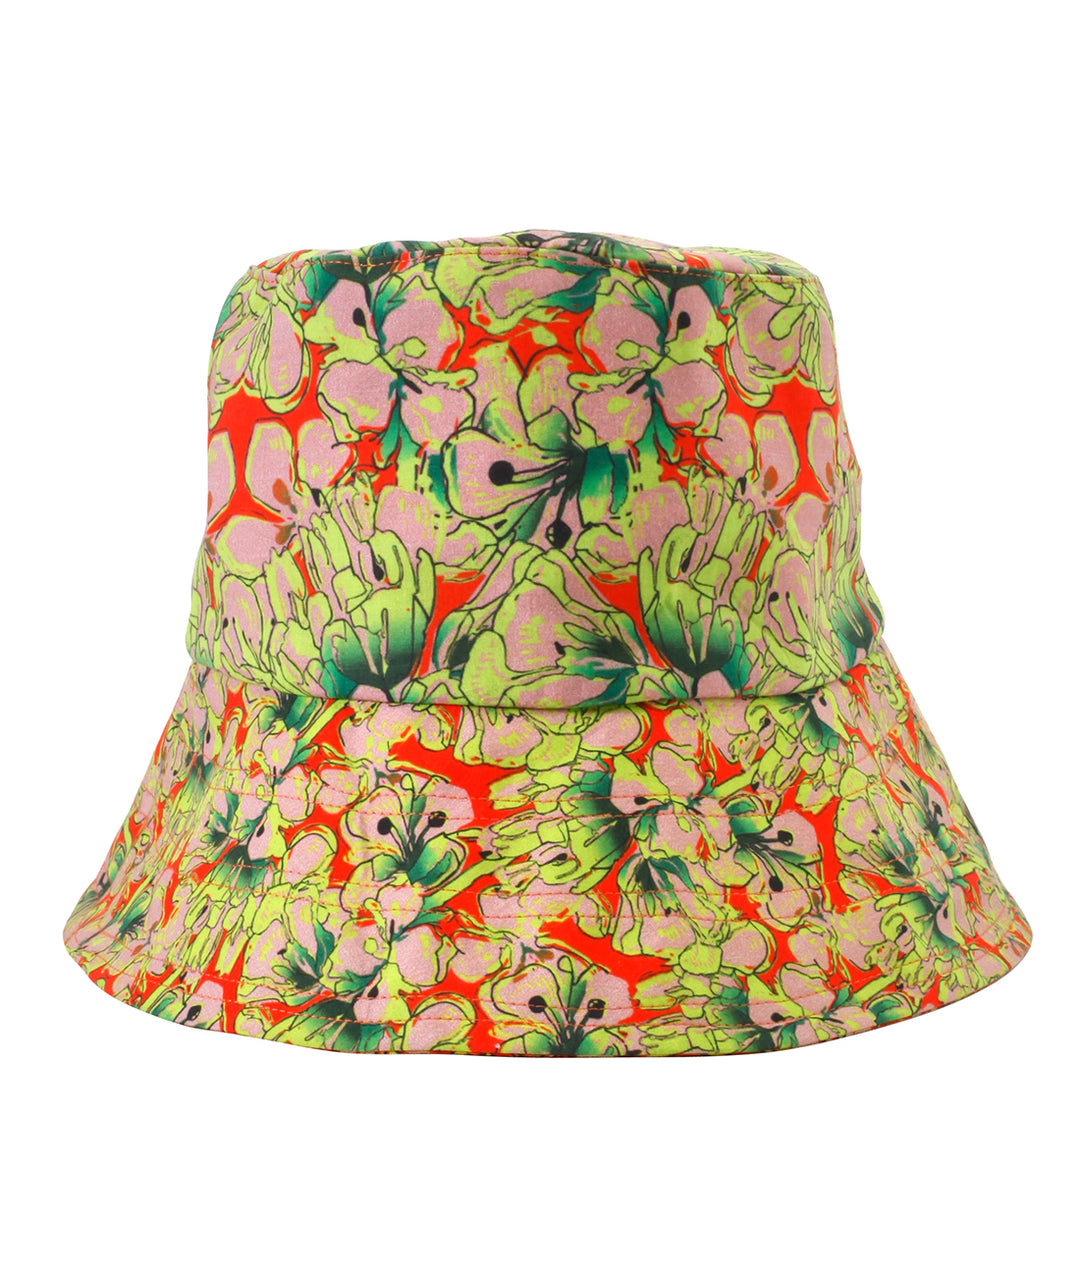 Neon Floral Recycled Cotton Bucket Hat